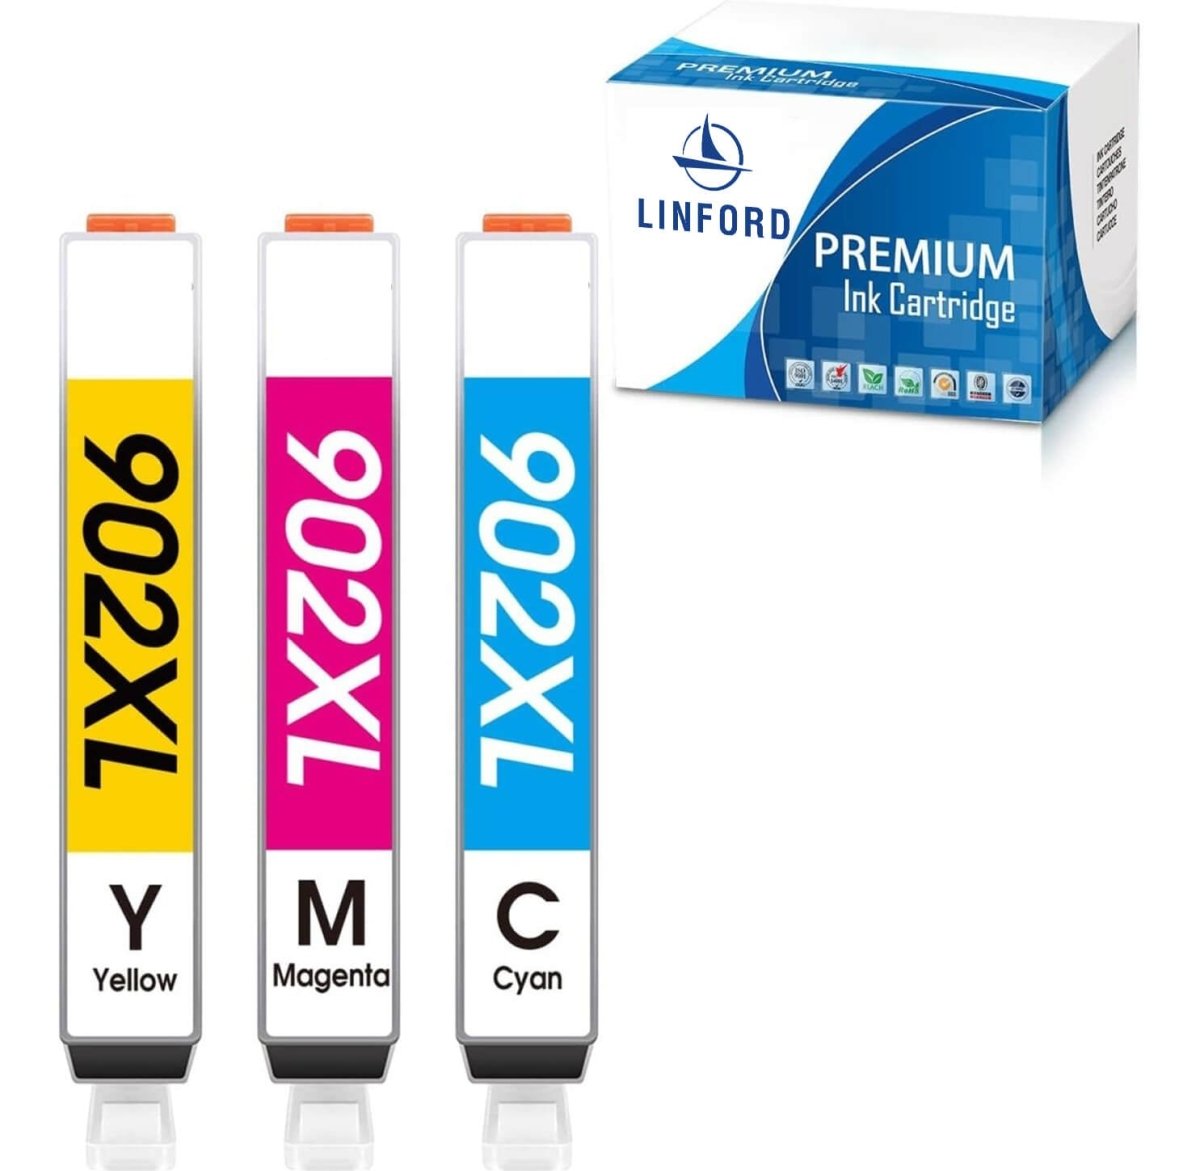 Compatible HP 902XL Color Ink Cartridges 3 Pack (Cyan Magenta Yellow) - Linford Office:Printer Ink & Toner Cartridge